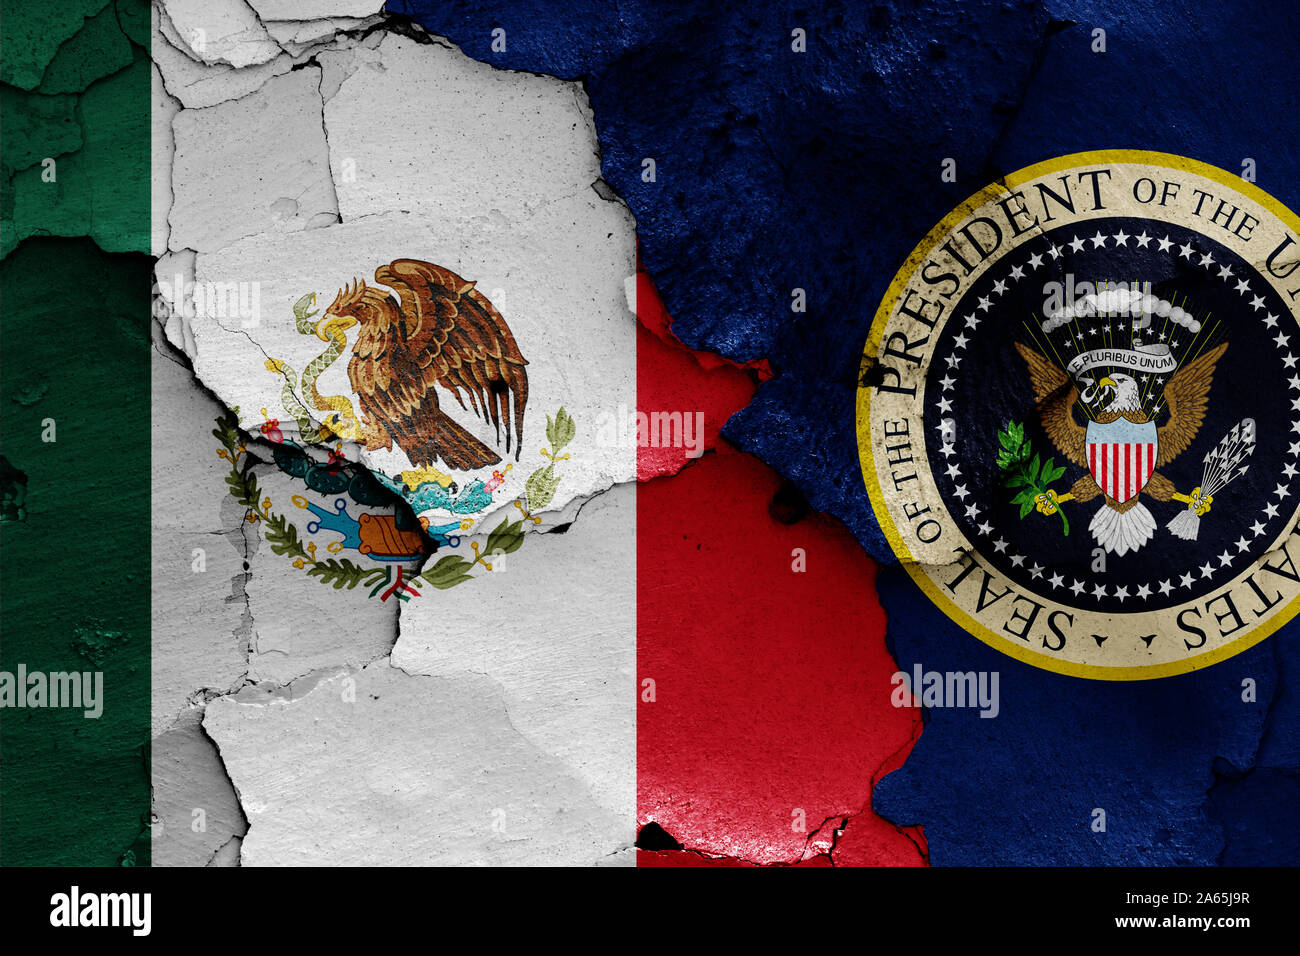 flags of Mexico and President of the United States painted on cracked wall Stock Photo